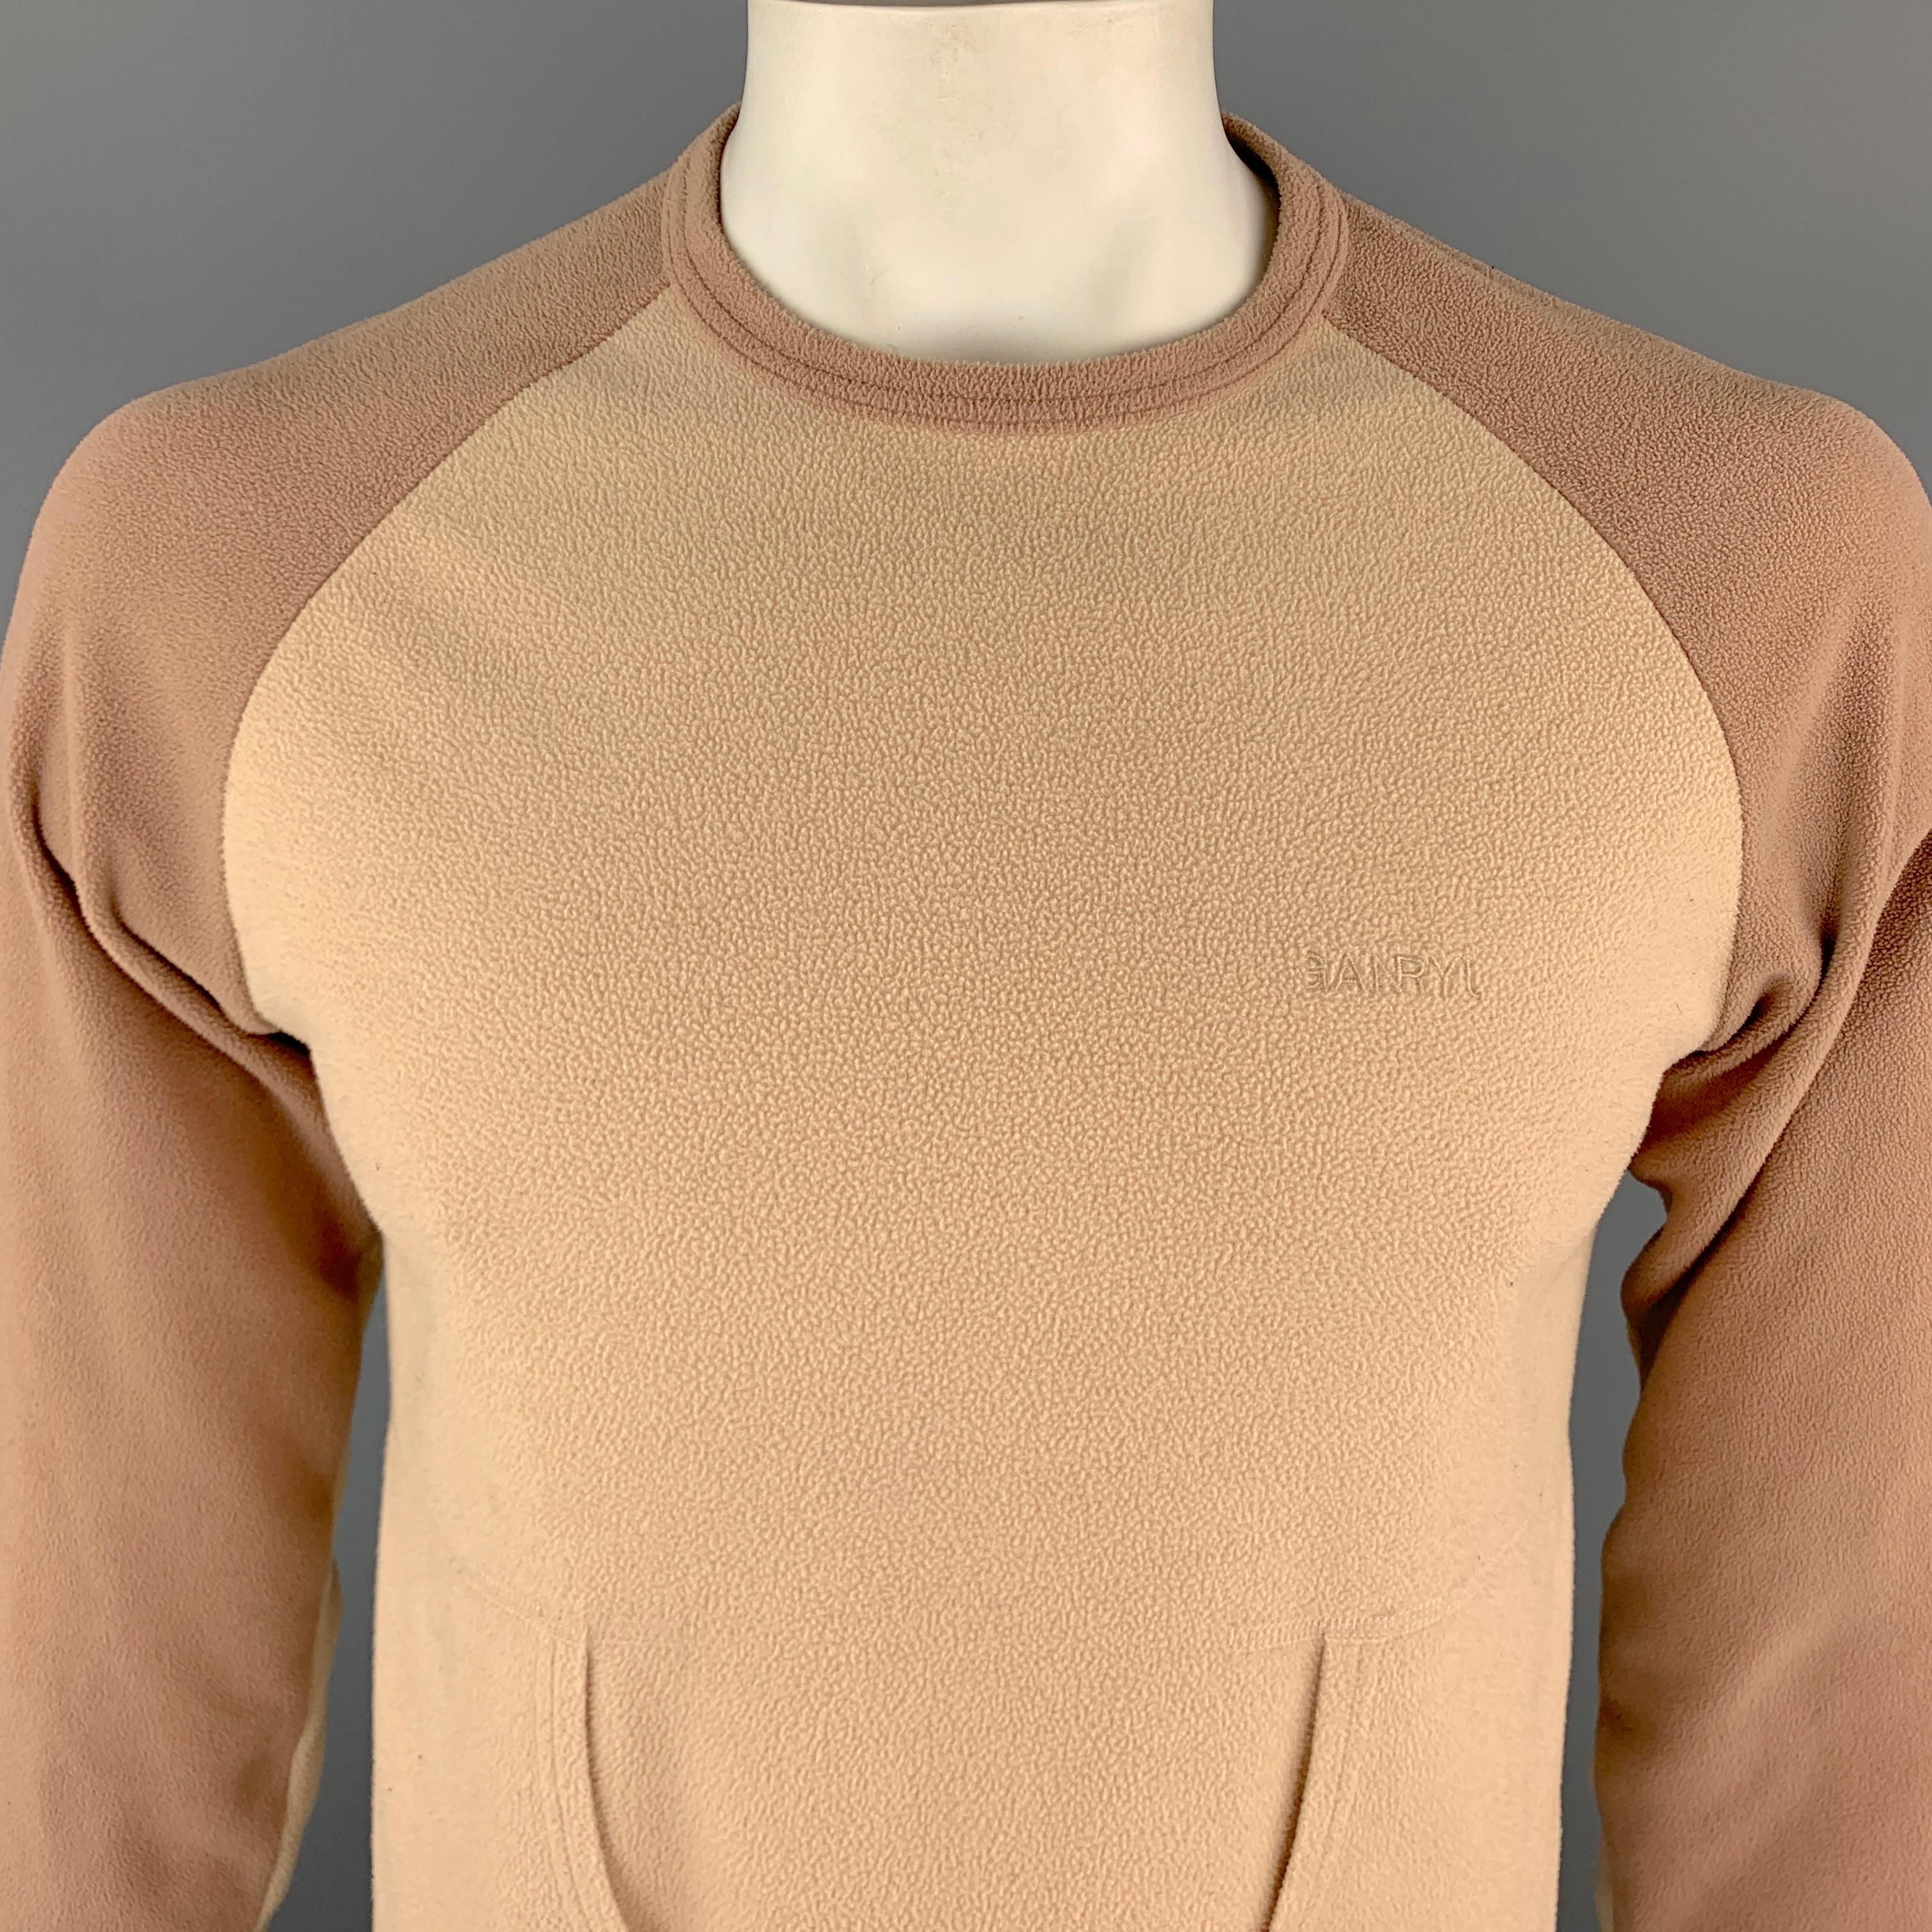 COMME des GARCONS GANRYU Pullover Sweater comes in beige and white tones, color block, in a cotton material, with a crewneck, raglan long sleeves, and patch pockets at front. As is. Made in Japan.

Good Pre-Owned Condition.
Marked: No